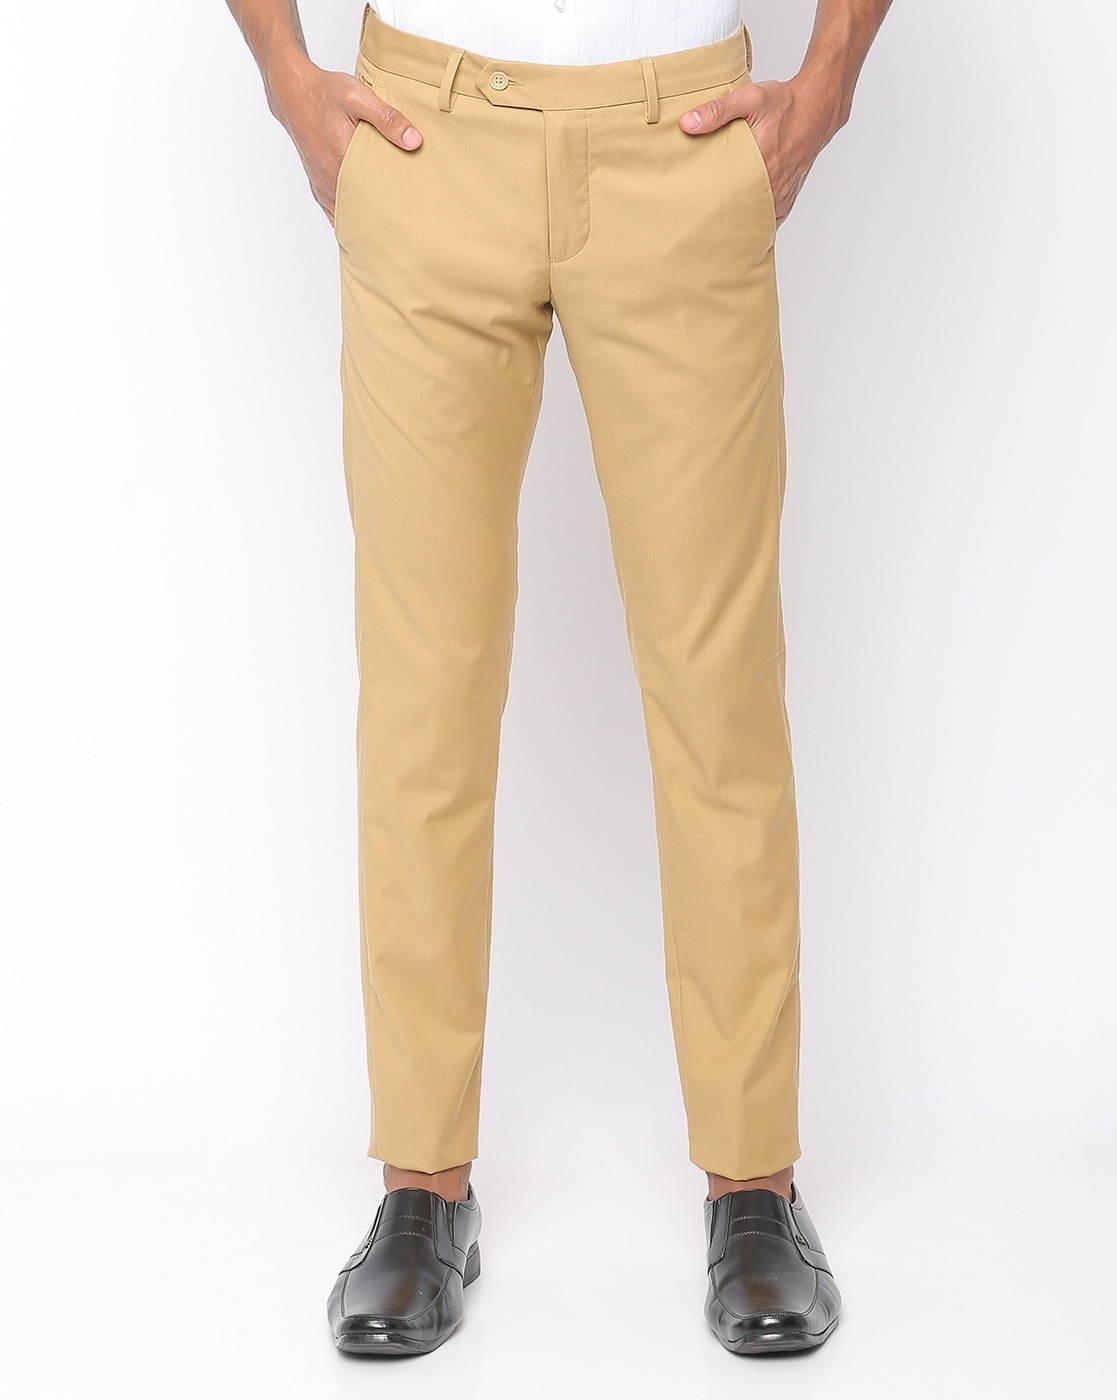 ONLY VIMAL Slim Fit Men Brown Trousers  Buy ONLY VIMAL Slim Fit Men Brown Trousers  Online at Best Prices in India  Shopsyin